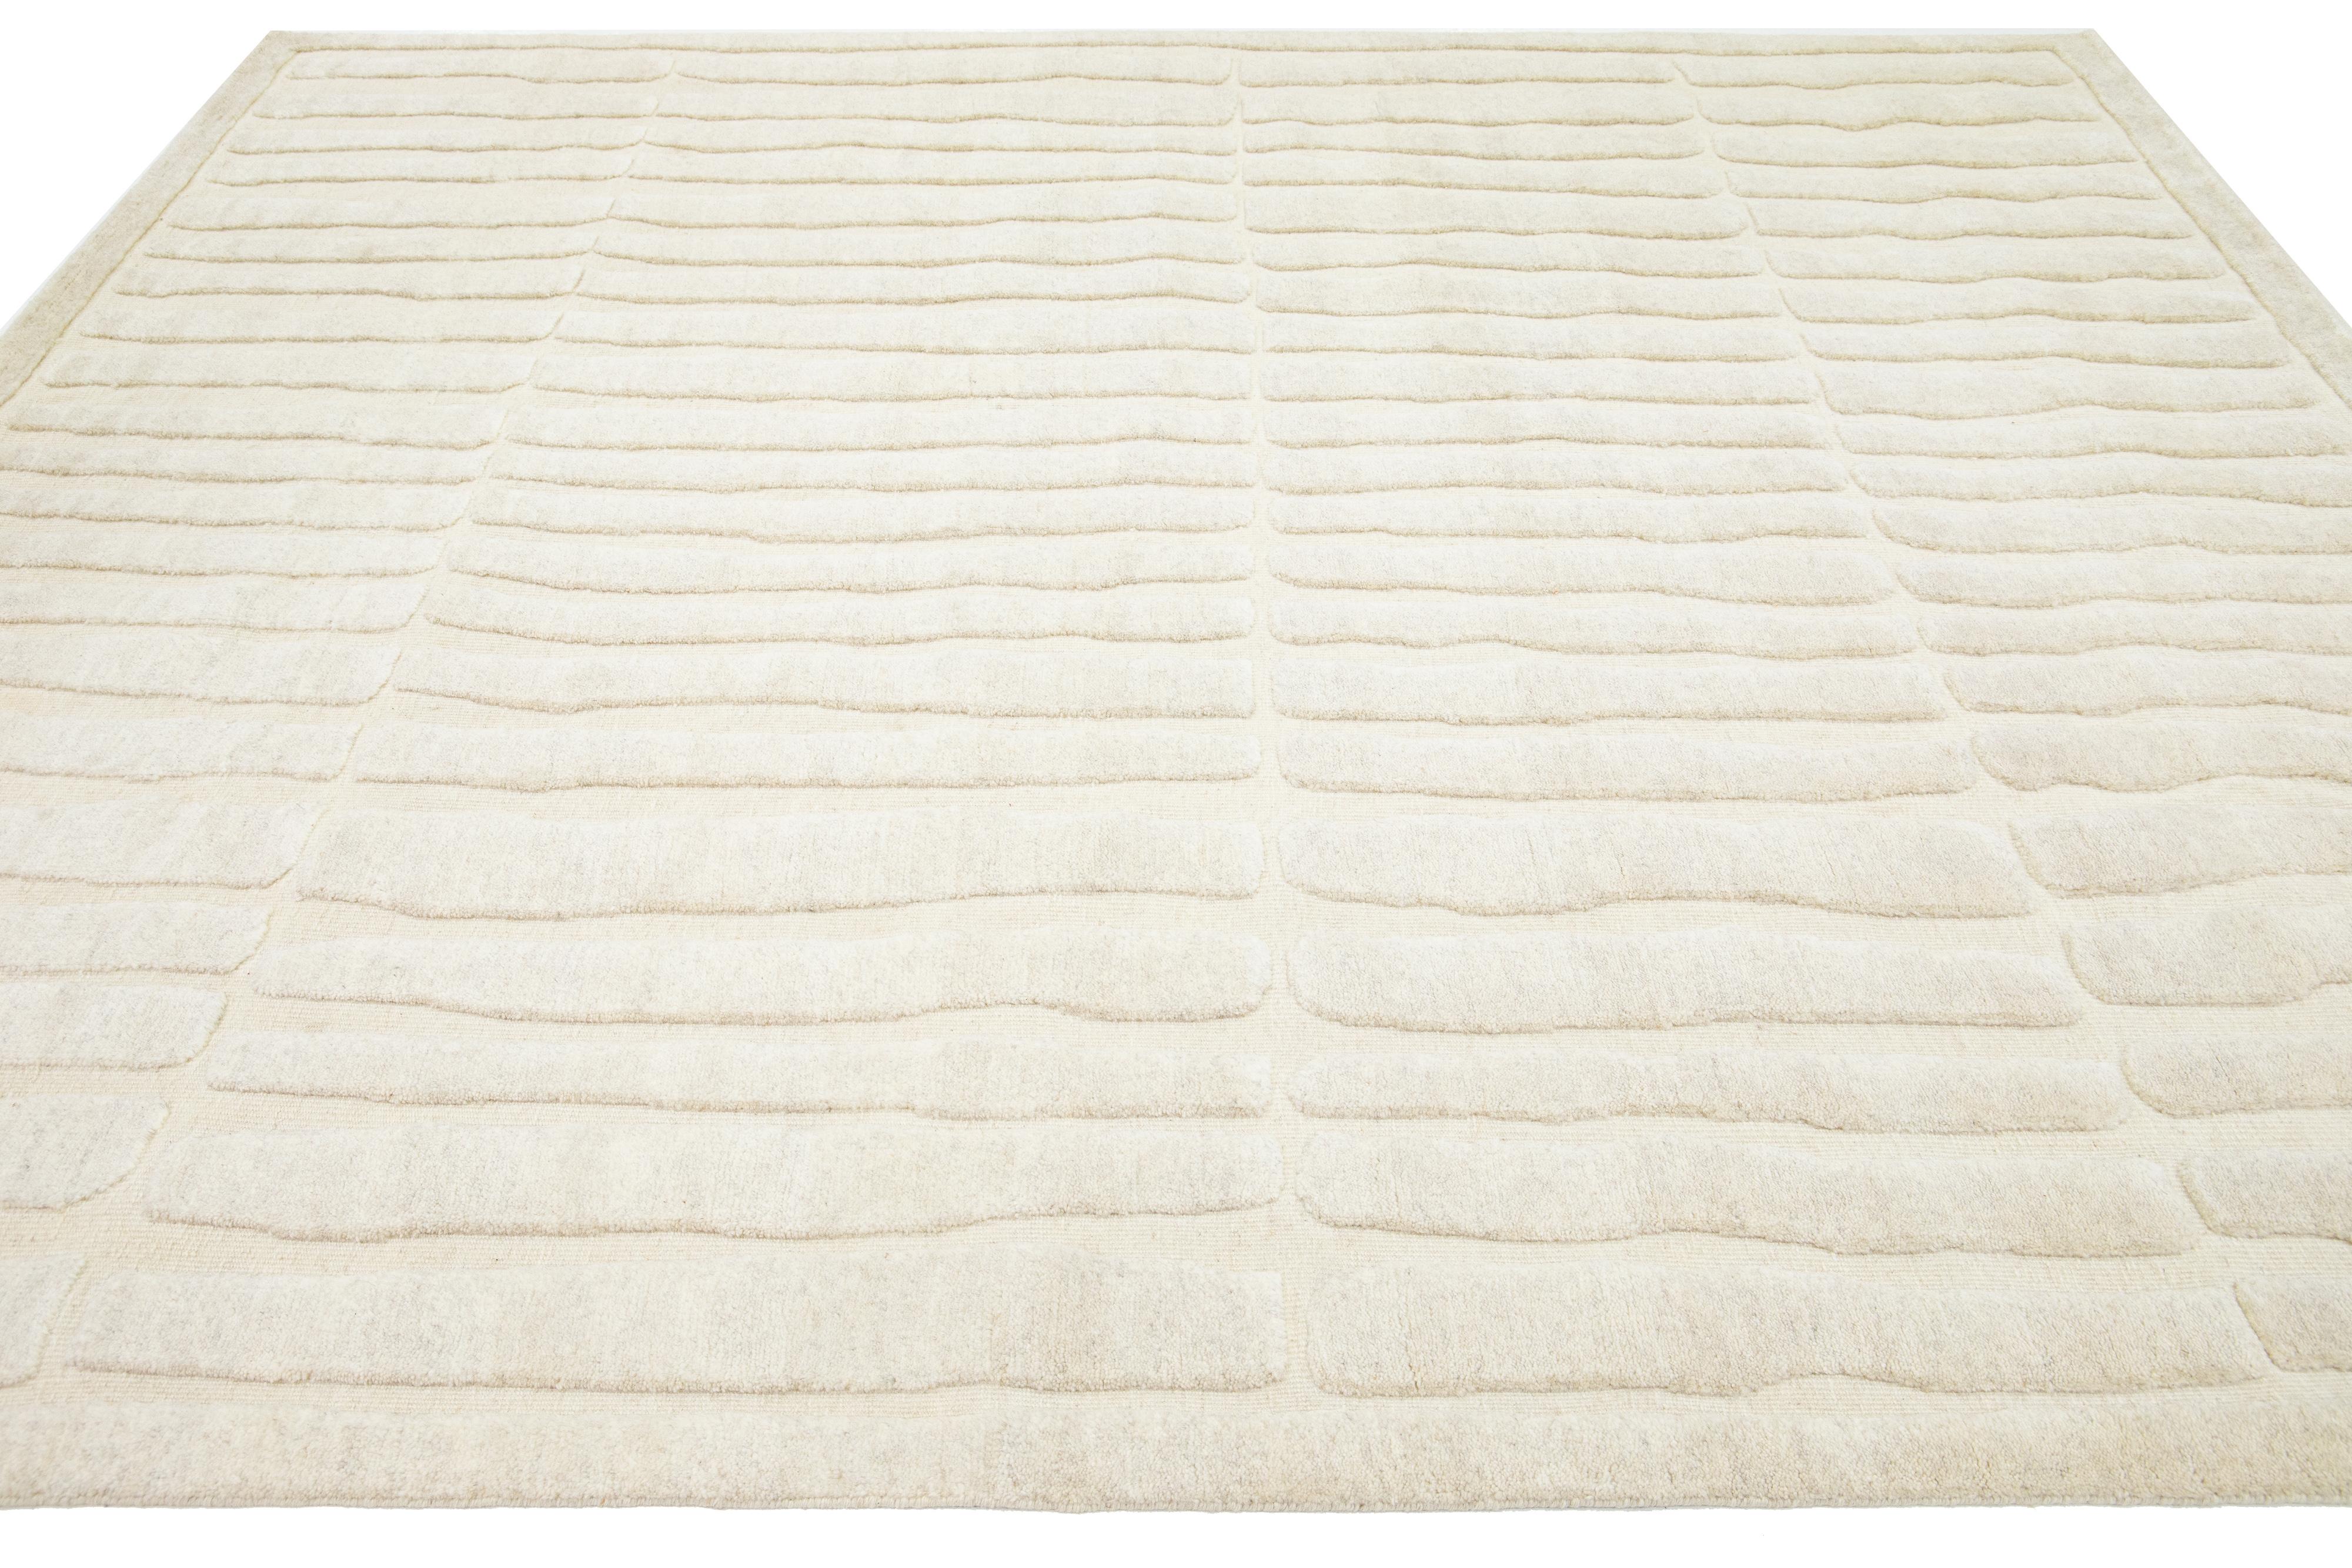 Apadana's Organic Modern Wool Rug Moroccan-Style In Ivory  In New Condition For Sale In Norwalk, CT